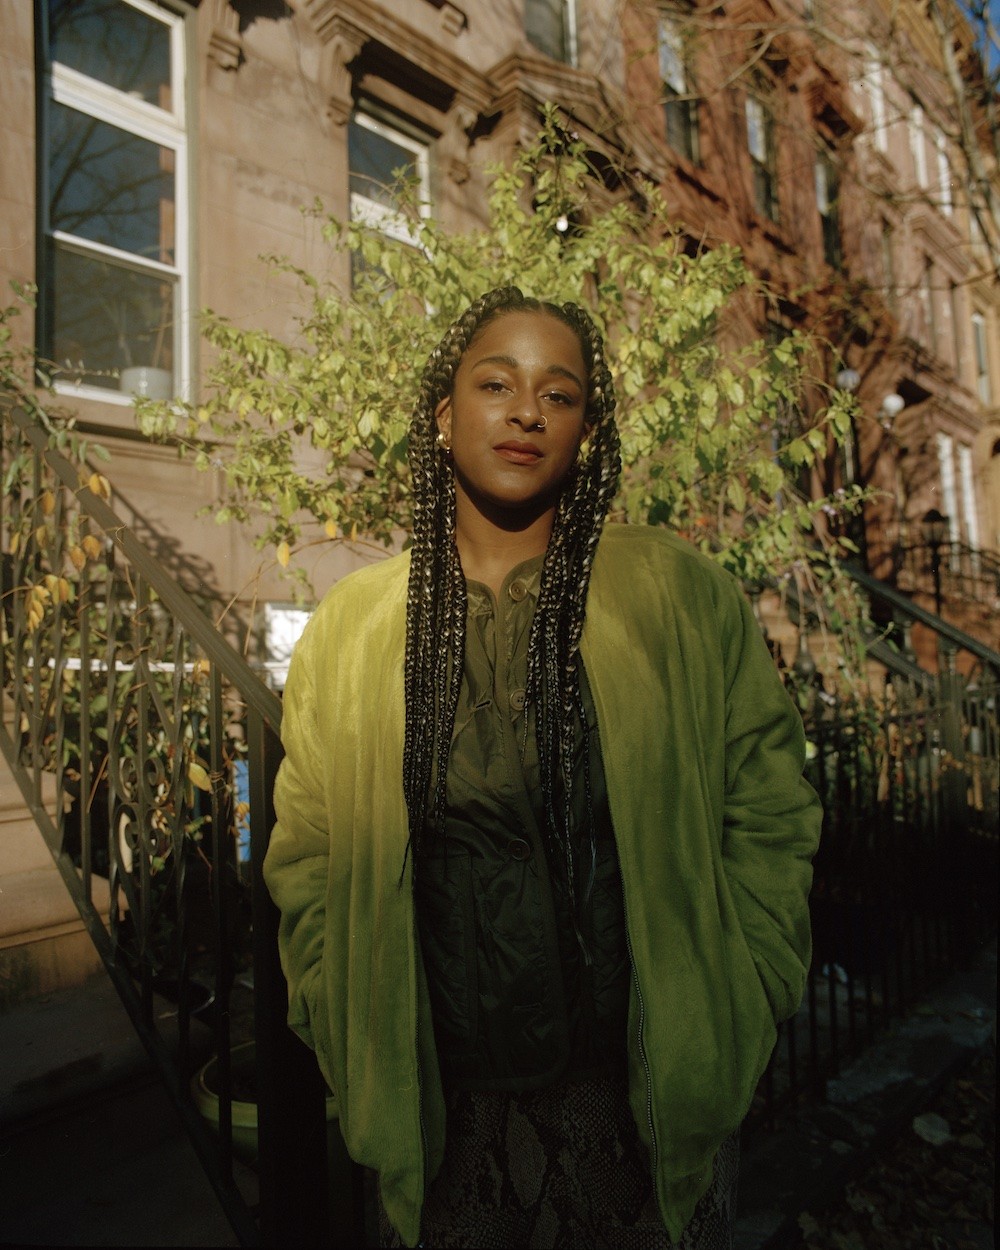 Taja Cheek is dressed in green, standing in front of a row of brownstones, caught between sunlight and shadows